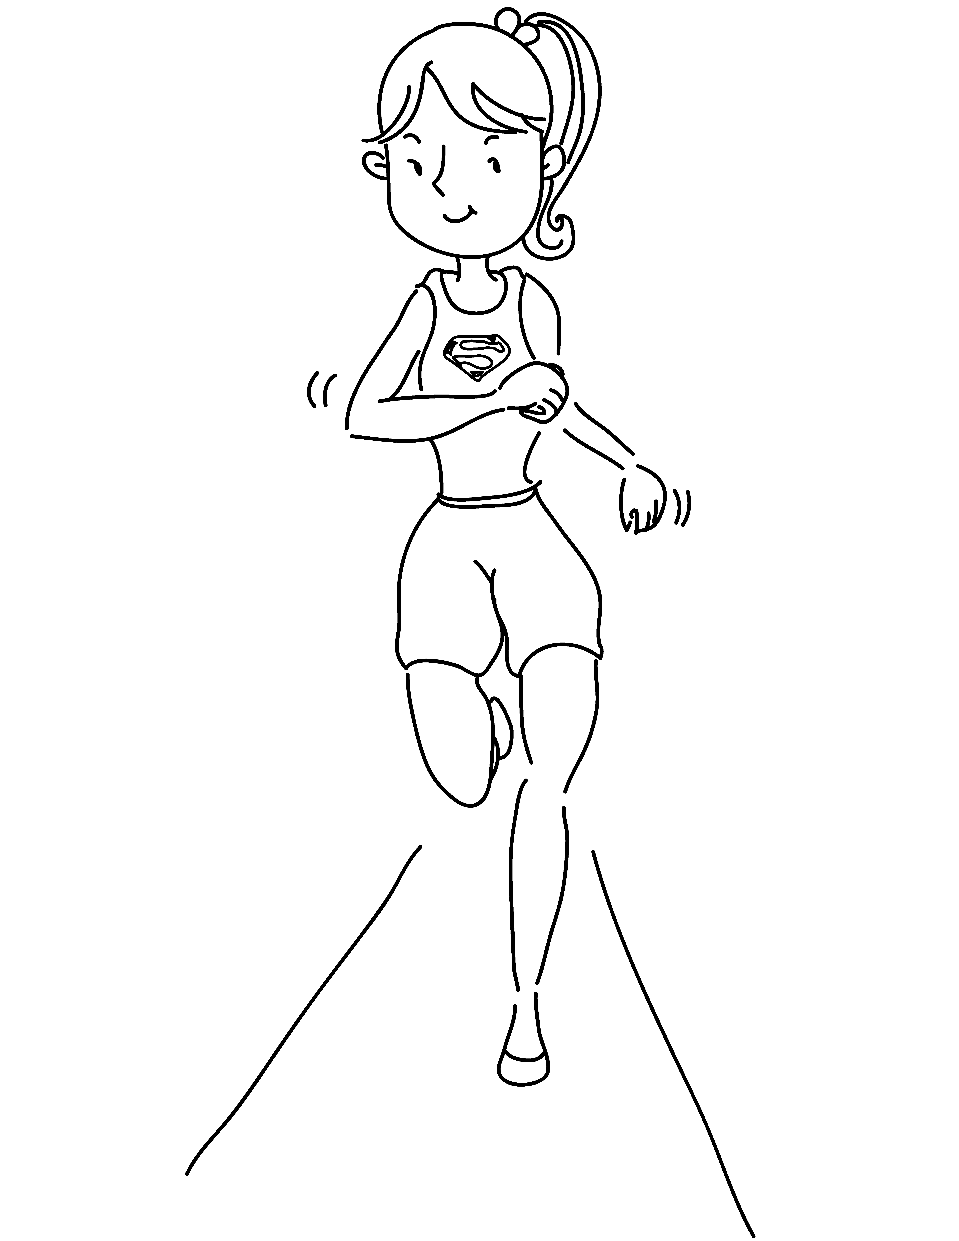 Supergirl Running Coloring Pages